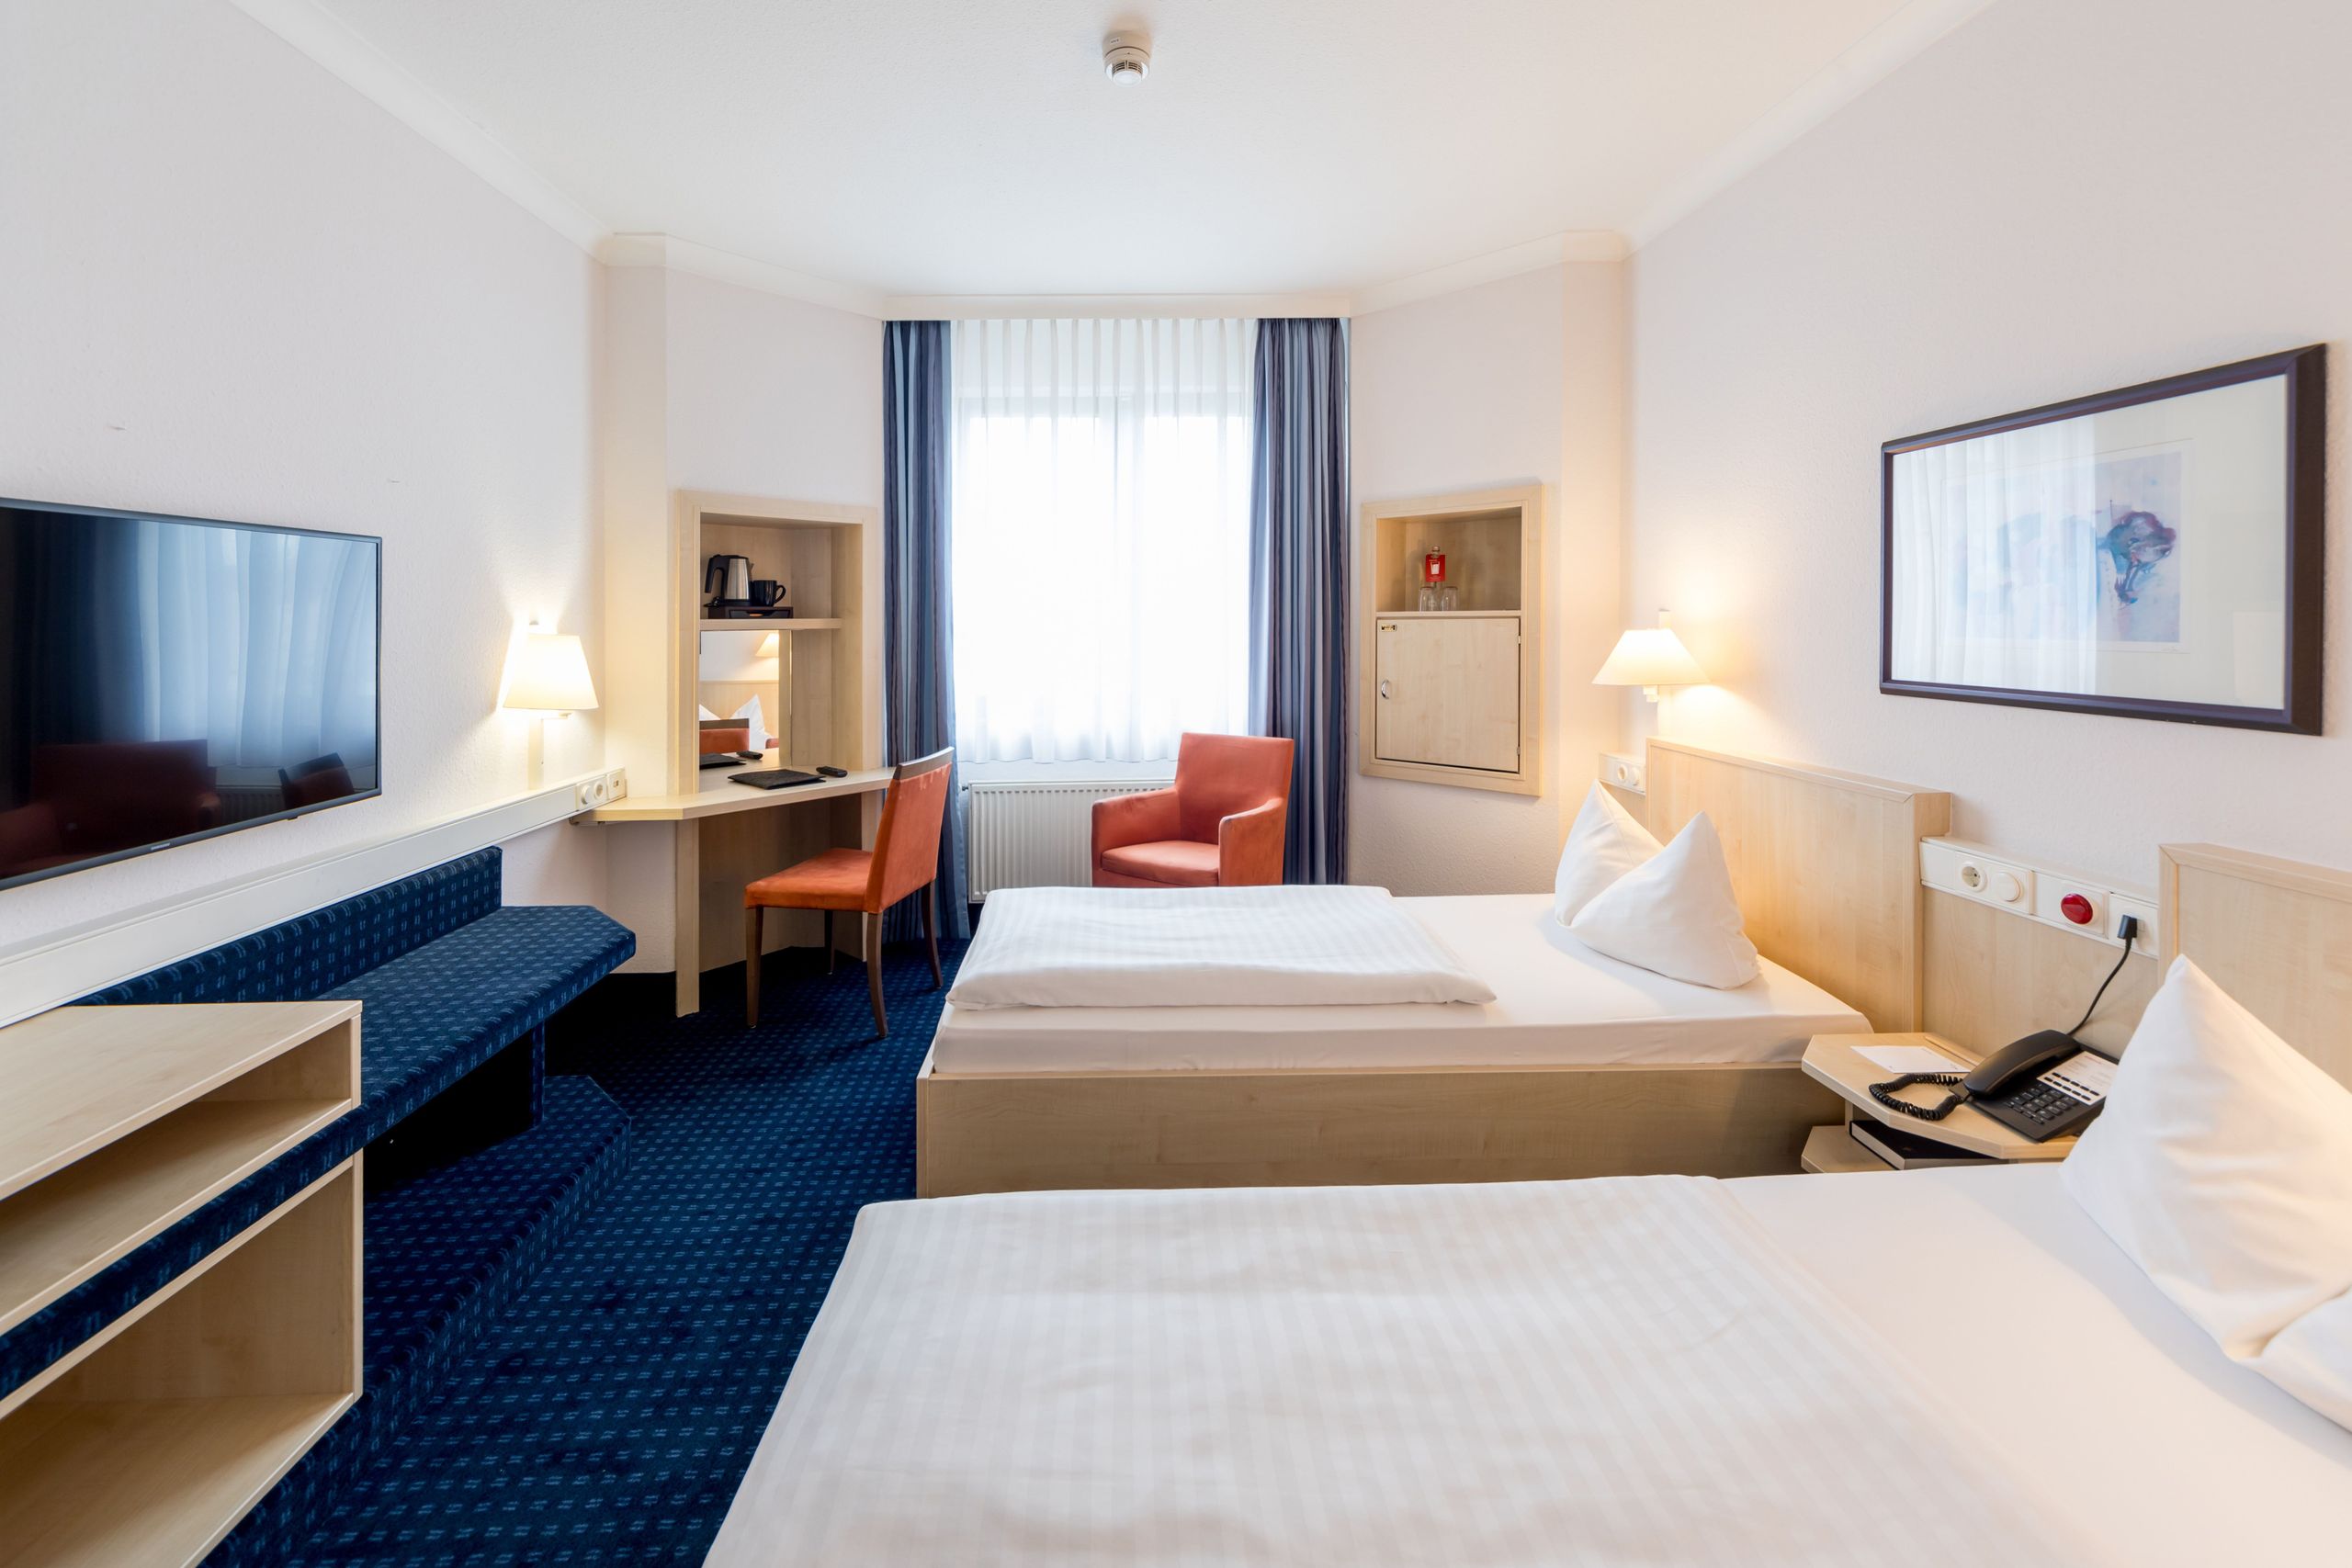 IntercityHotel Magdebourg - Chambre d'affaires twin